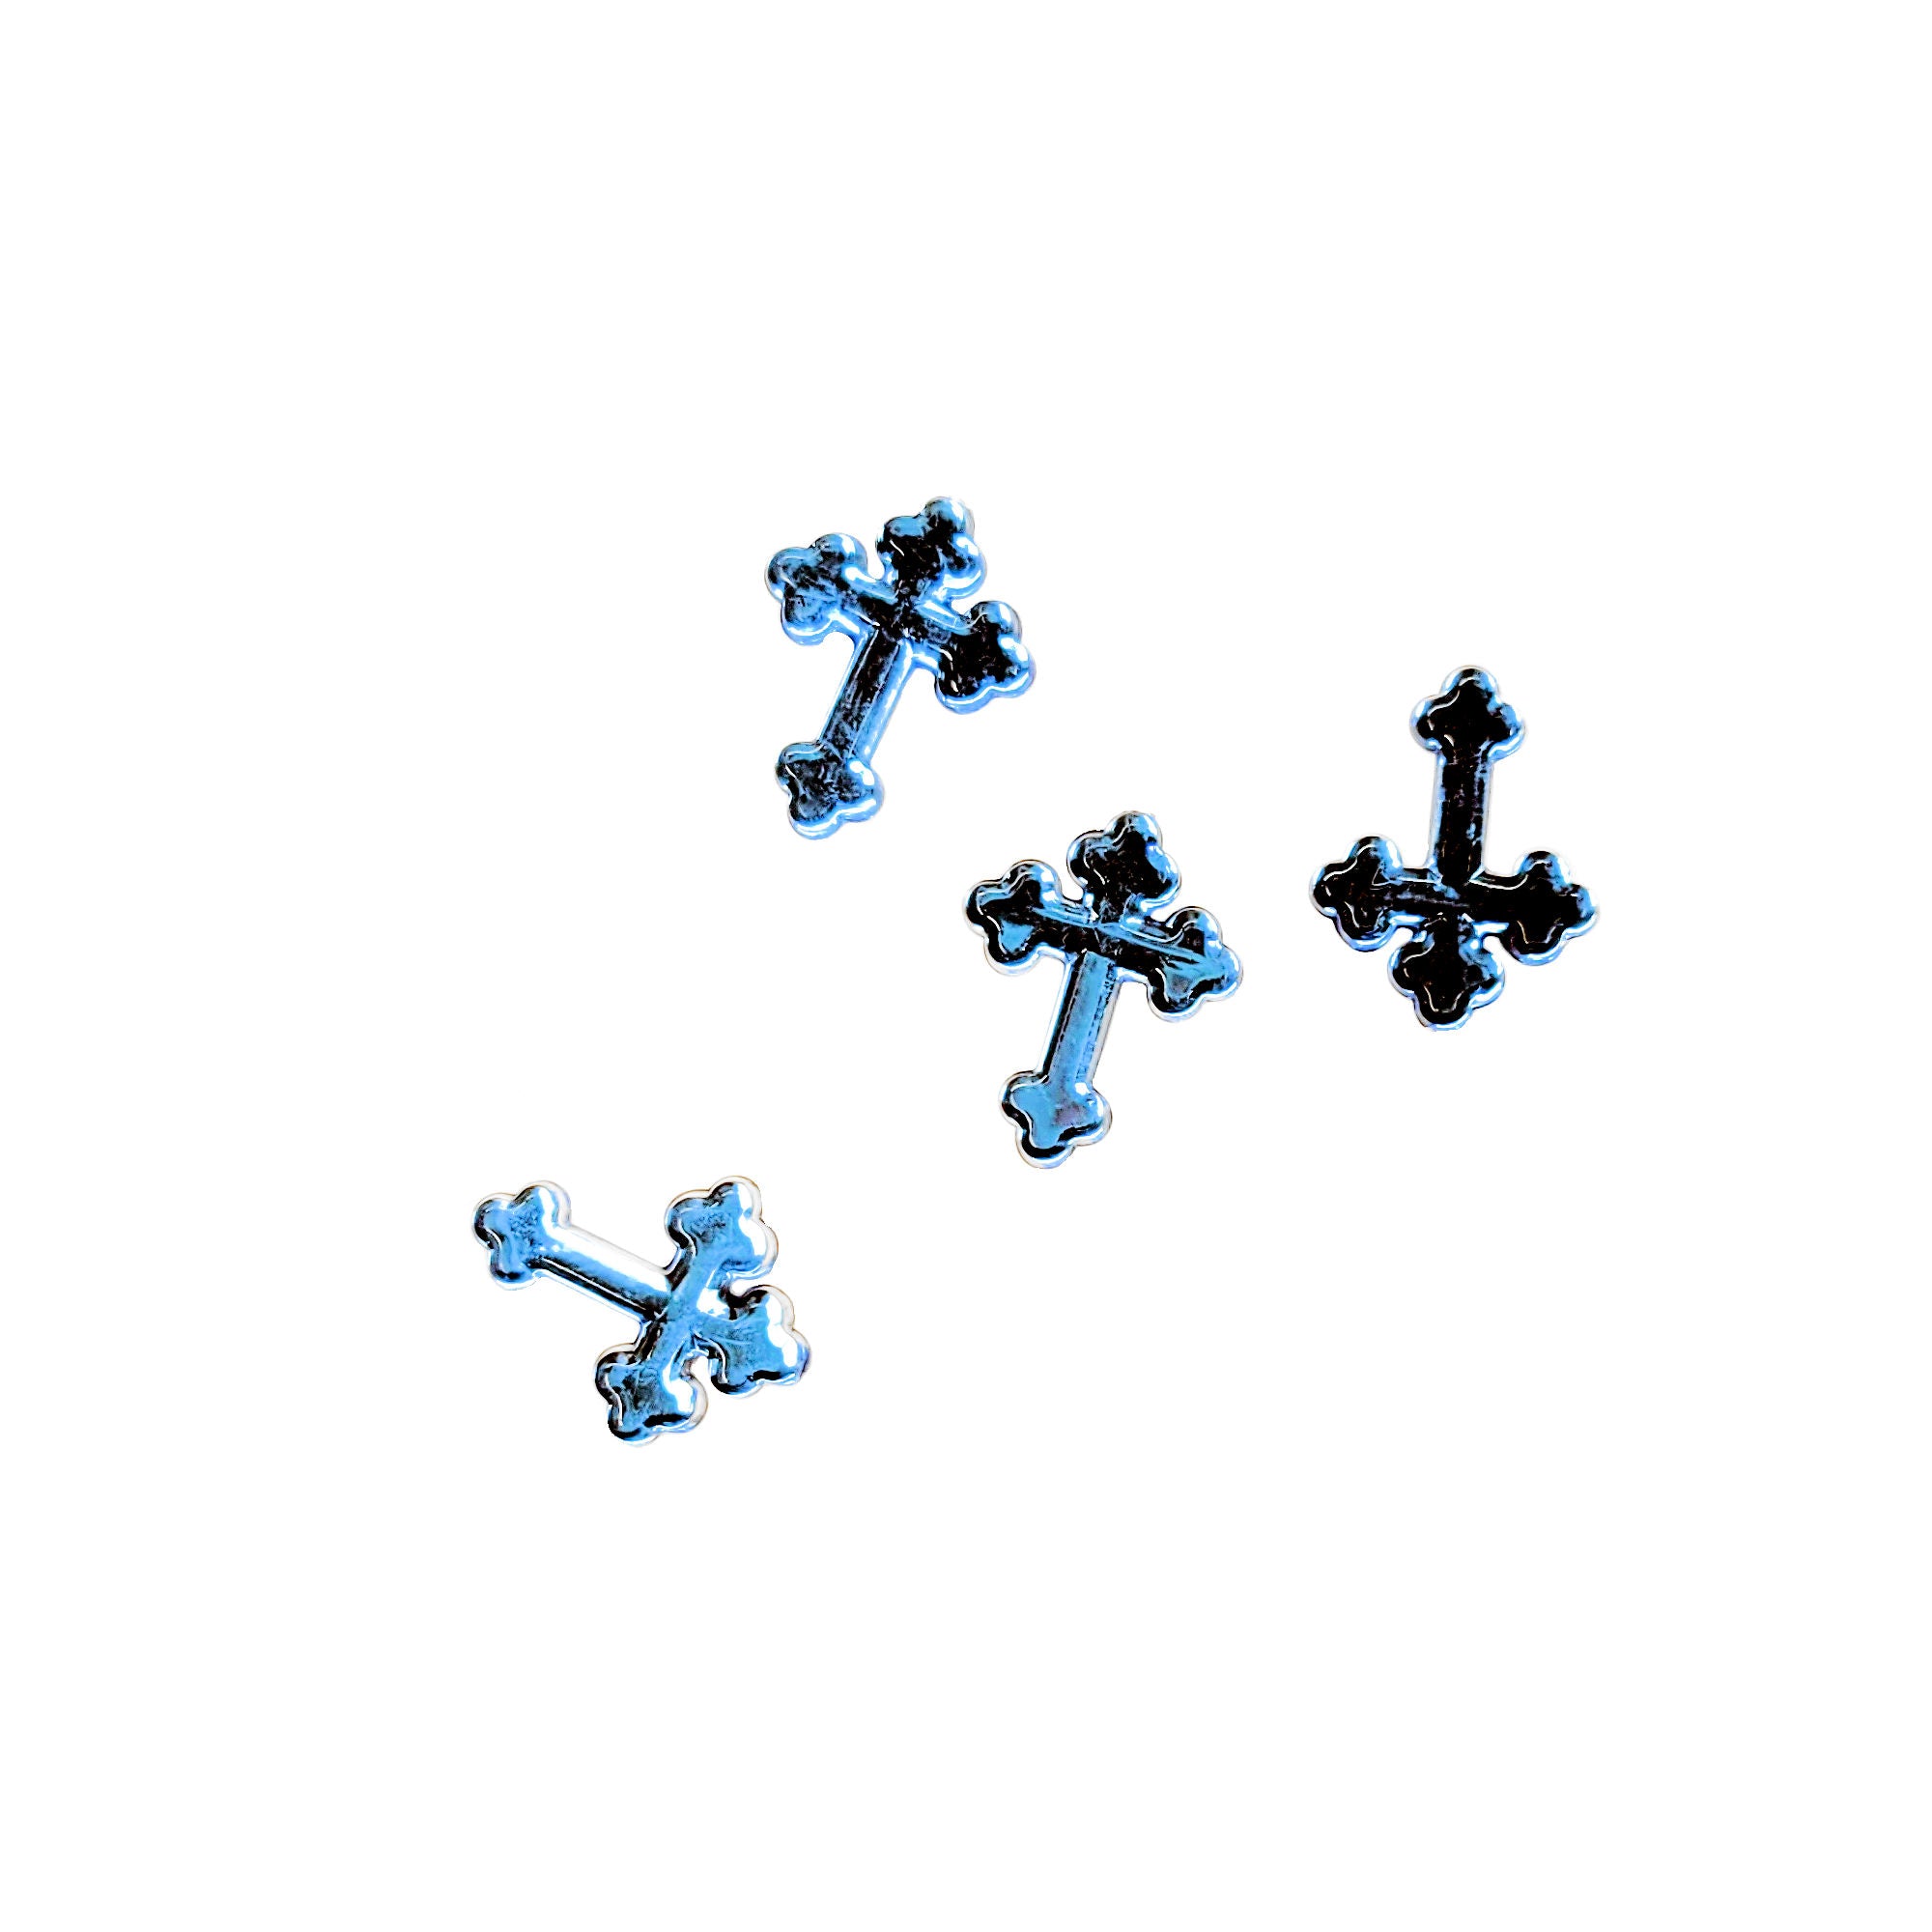 Holy Sacraments Collection .75" Blue Crosses by SSC Designs - Pkg. of 12